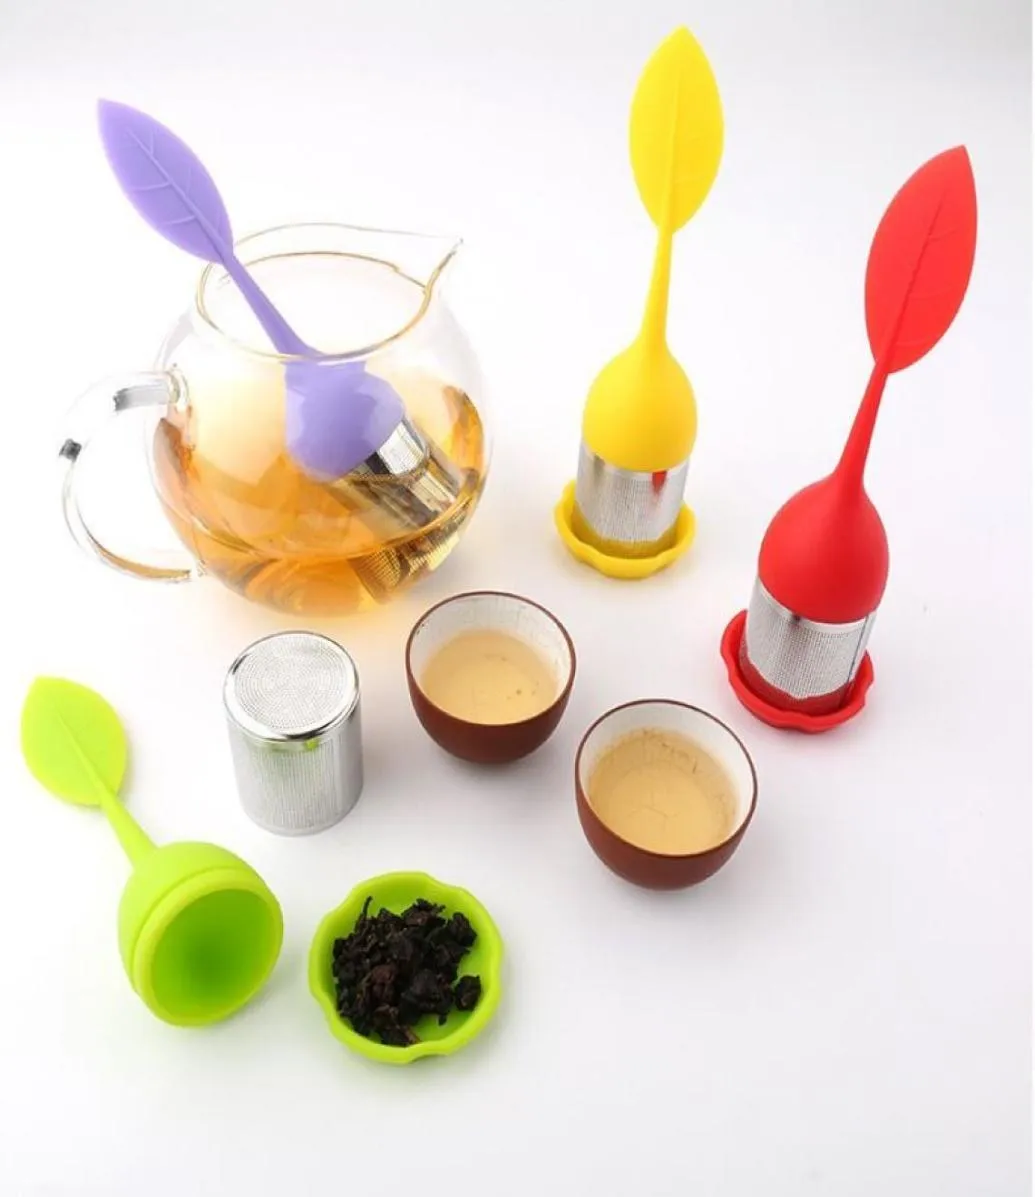 Creative Teapot Strainers Silicone Tea Spoon Infuser with Food Grade leaves Shape Stainless Steel Infusers Strainer Filter Leaf Li6083866